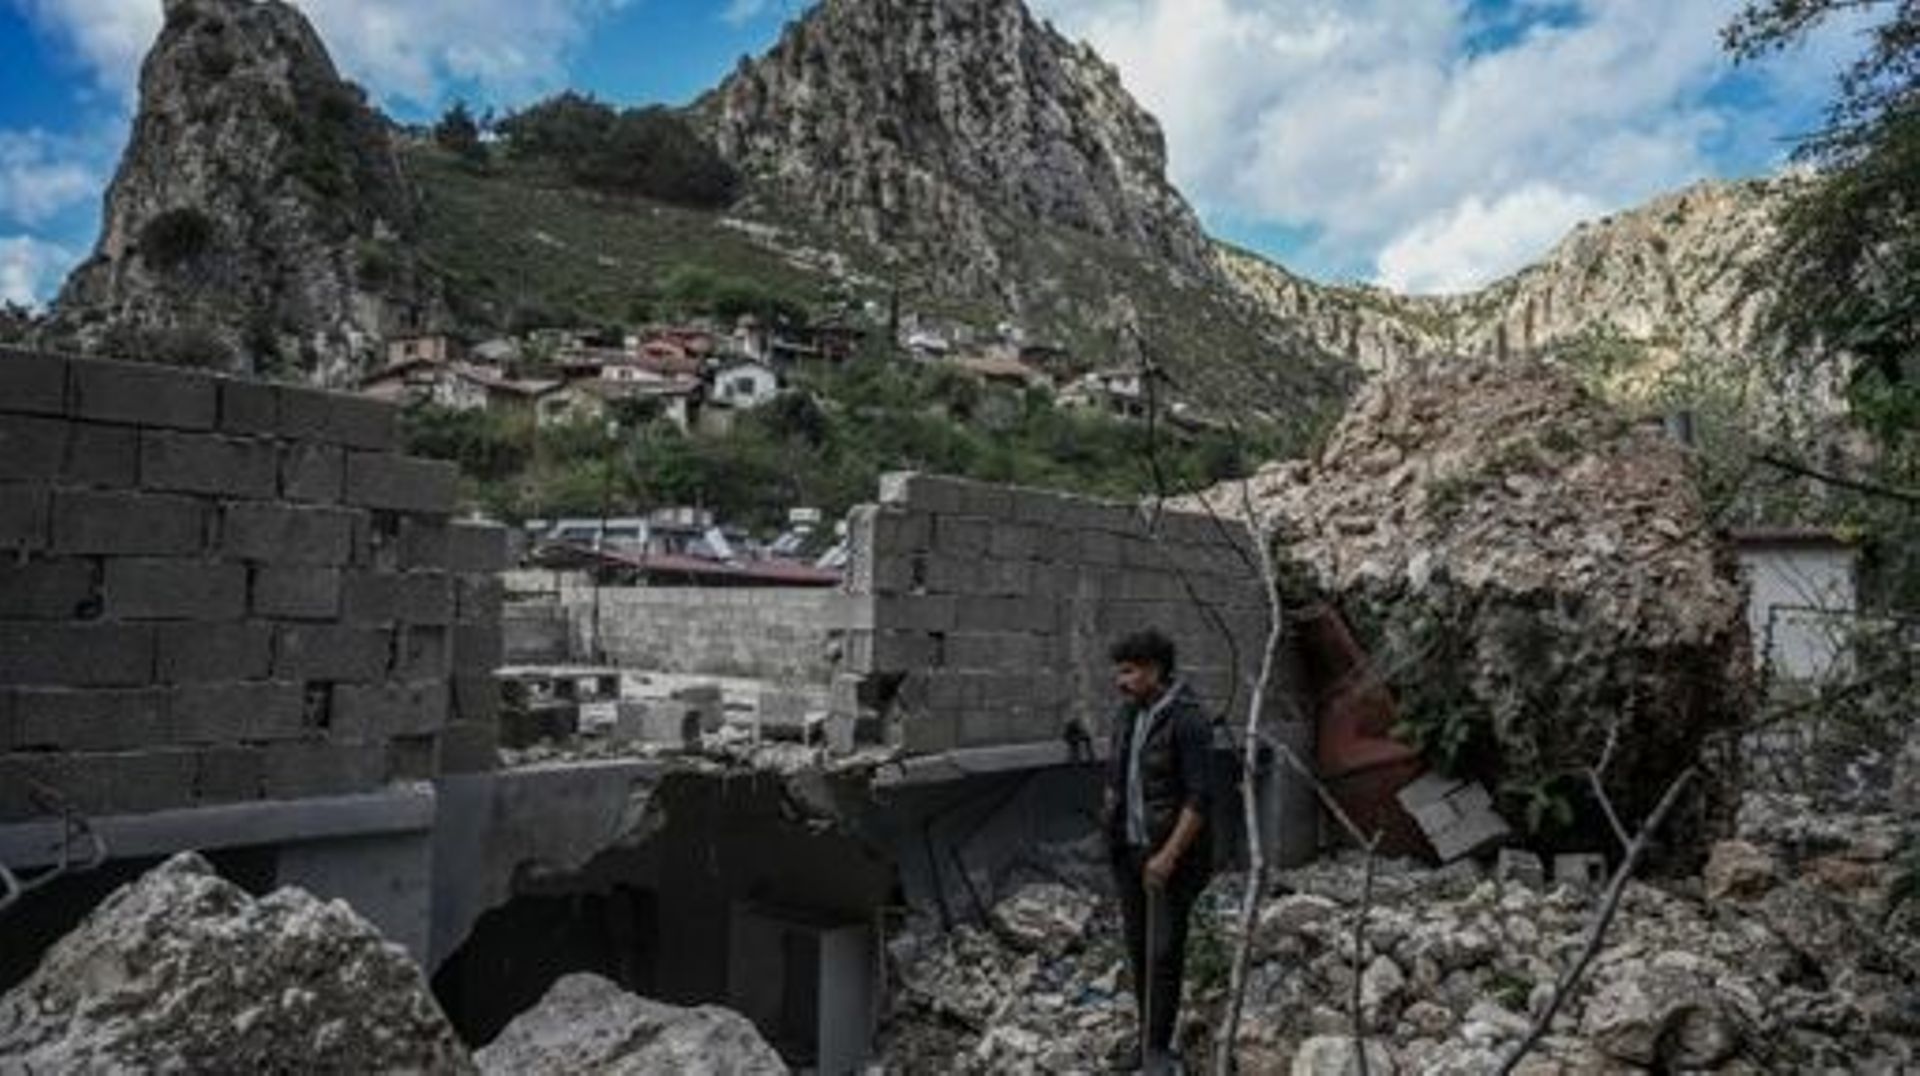 Cuma Zobi (L), a 38-year-old security guard, stands next to a building destroyed by falling stones of the Staurin mountain, two months after a 7.8-magnitude jolt and its aftershocks wiped out swathes of Turkey's mountainous southeast, in Antakya on April 